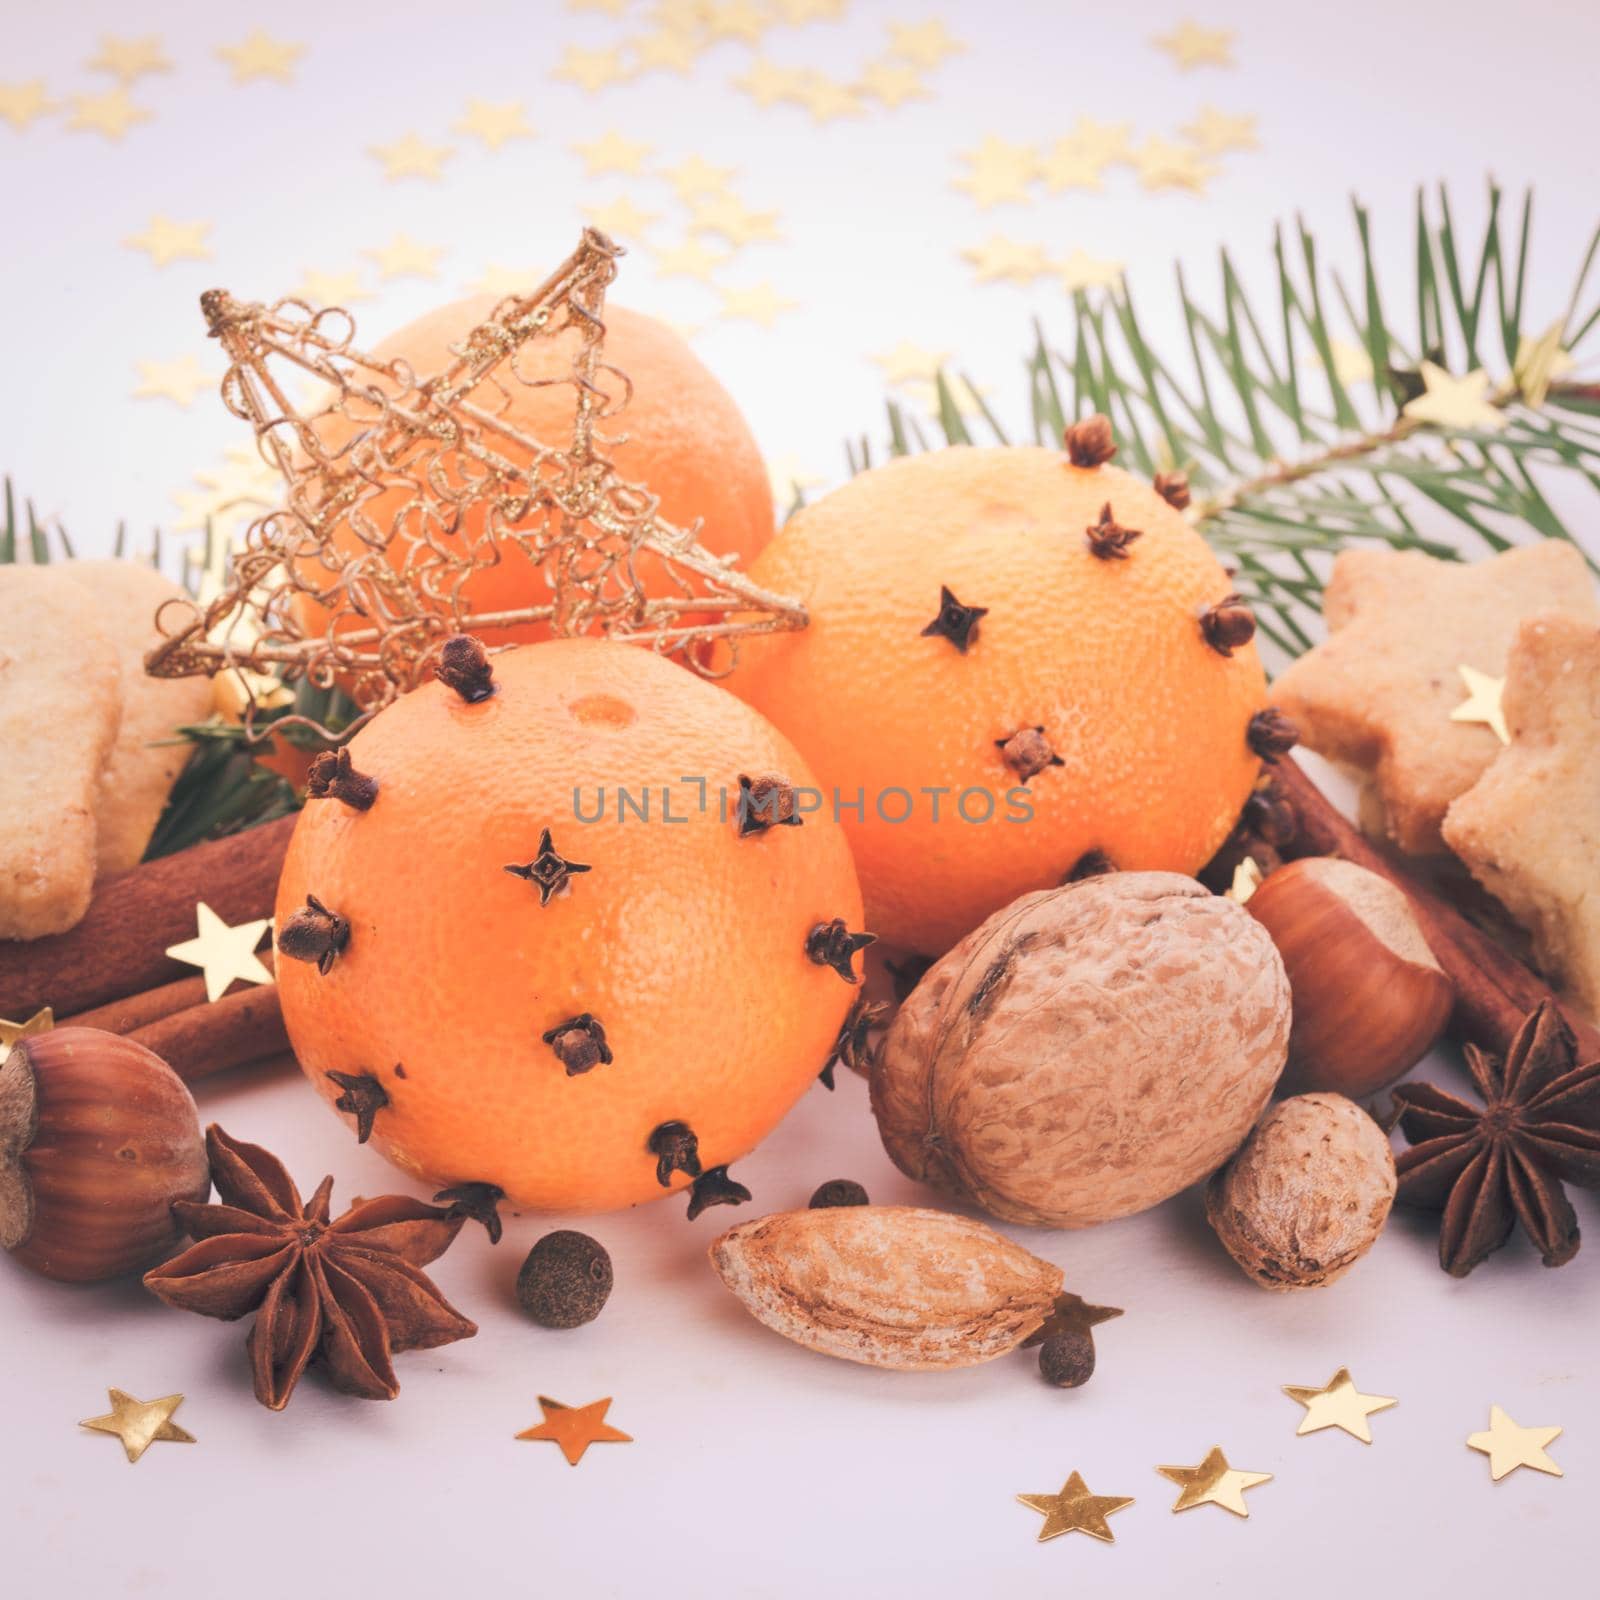 Aroma of Christmas - fir, tangerins and spices. Christmas cookies vintage styled